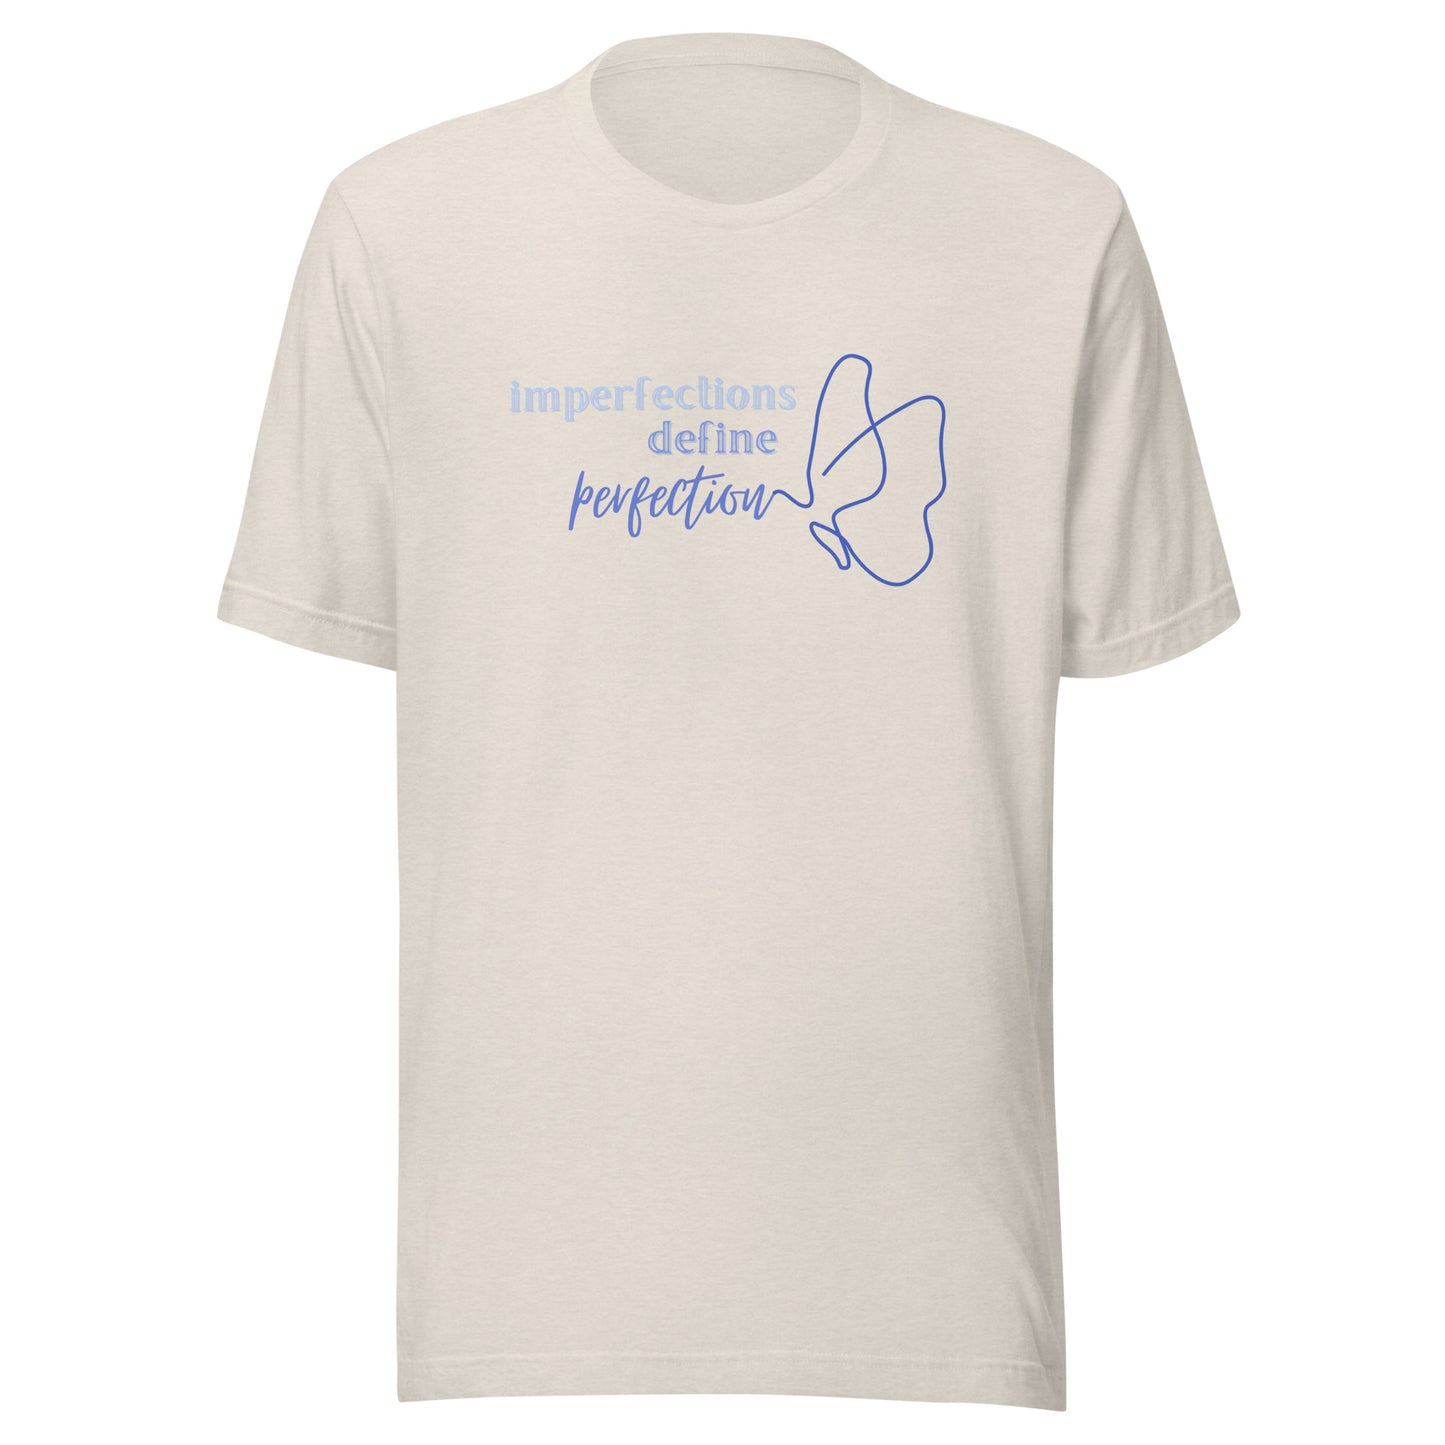 imperfections define perfection t-shirt